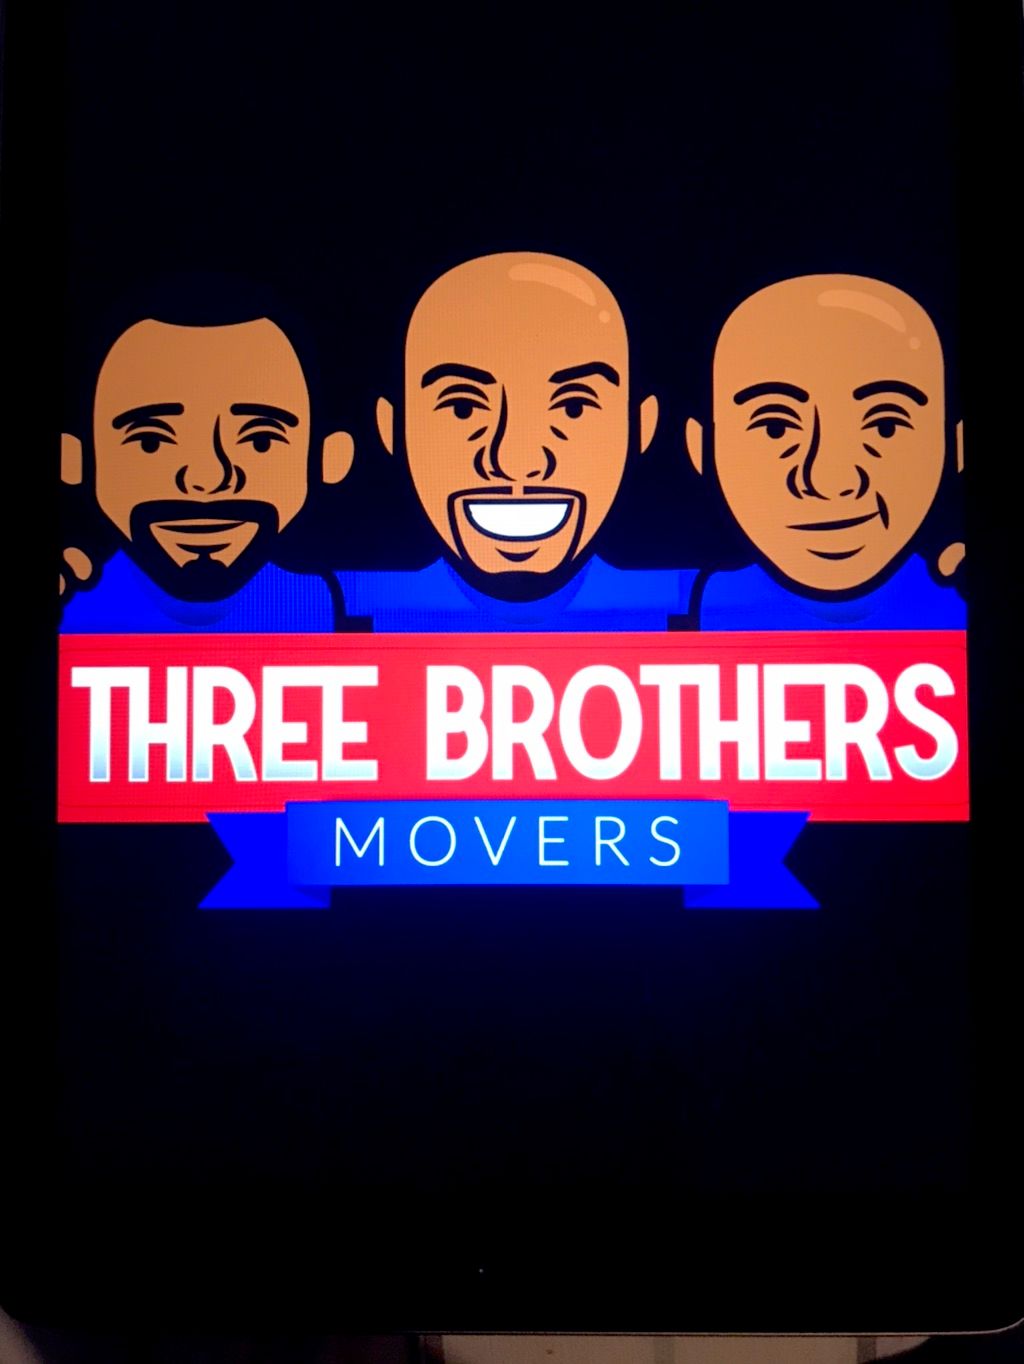 Three Brothers Movers